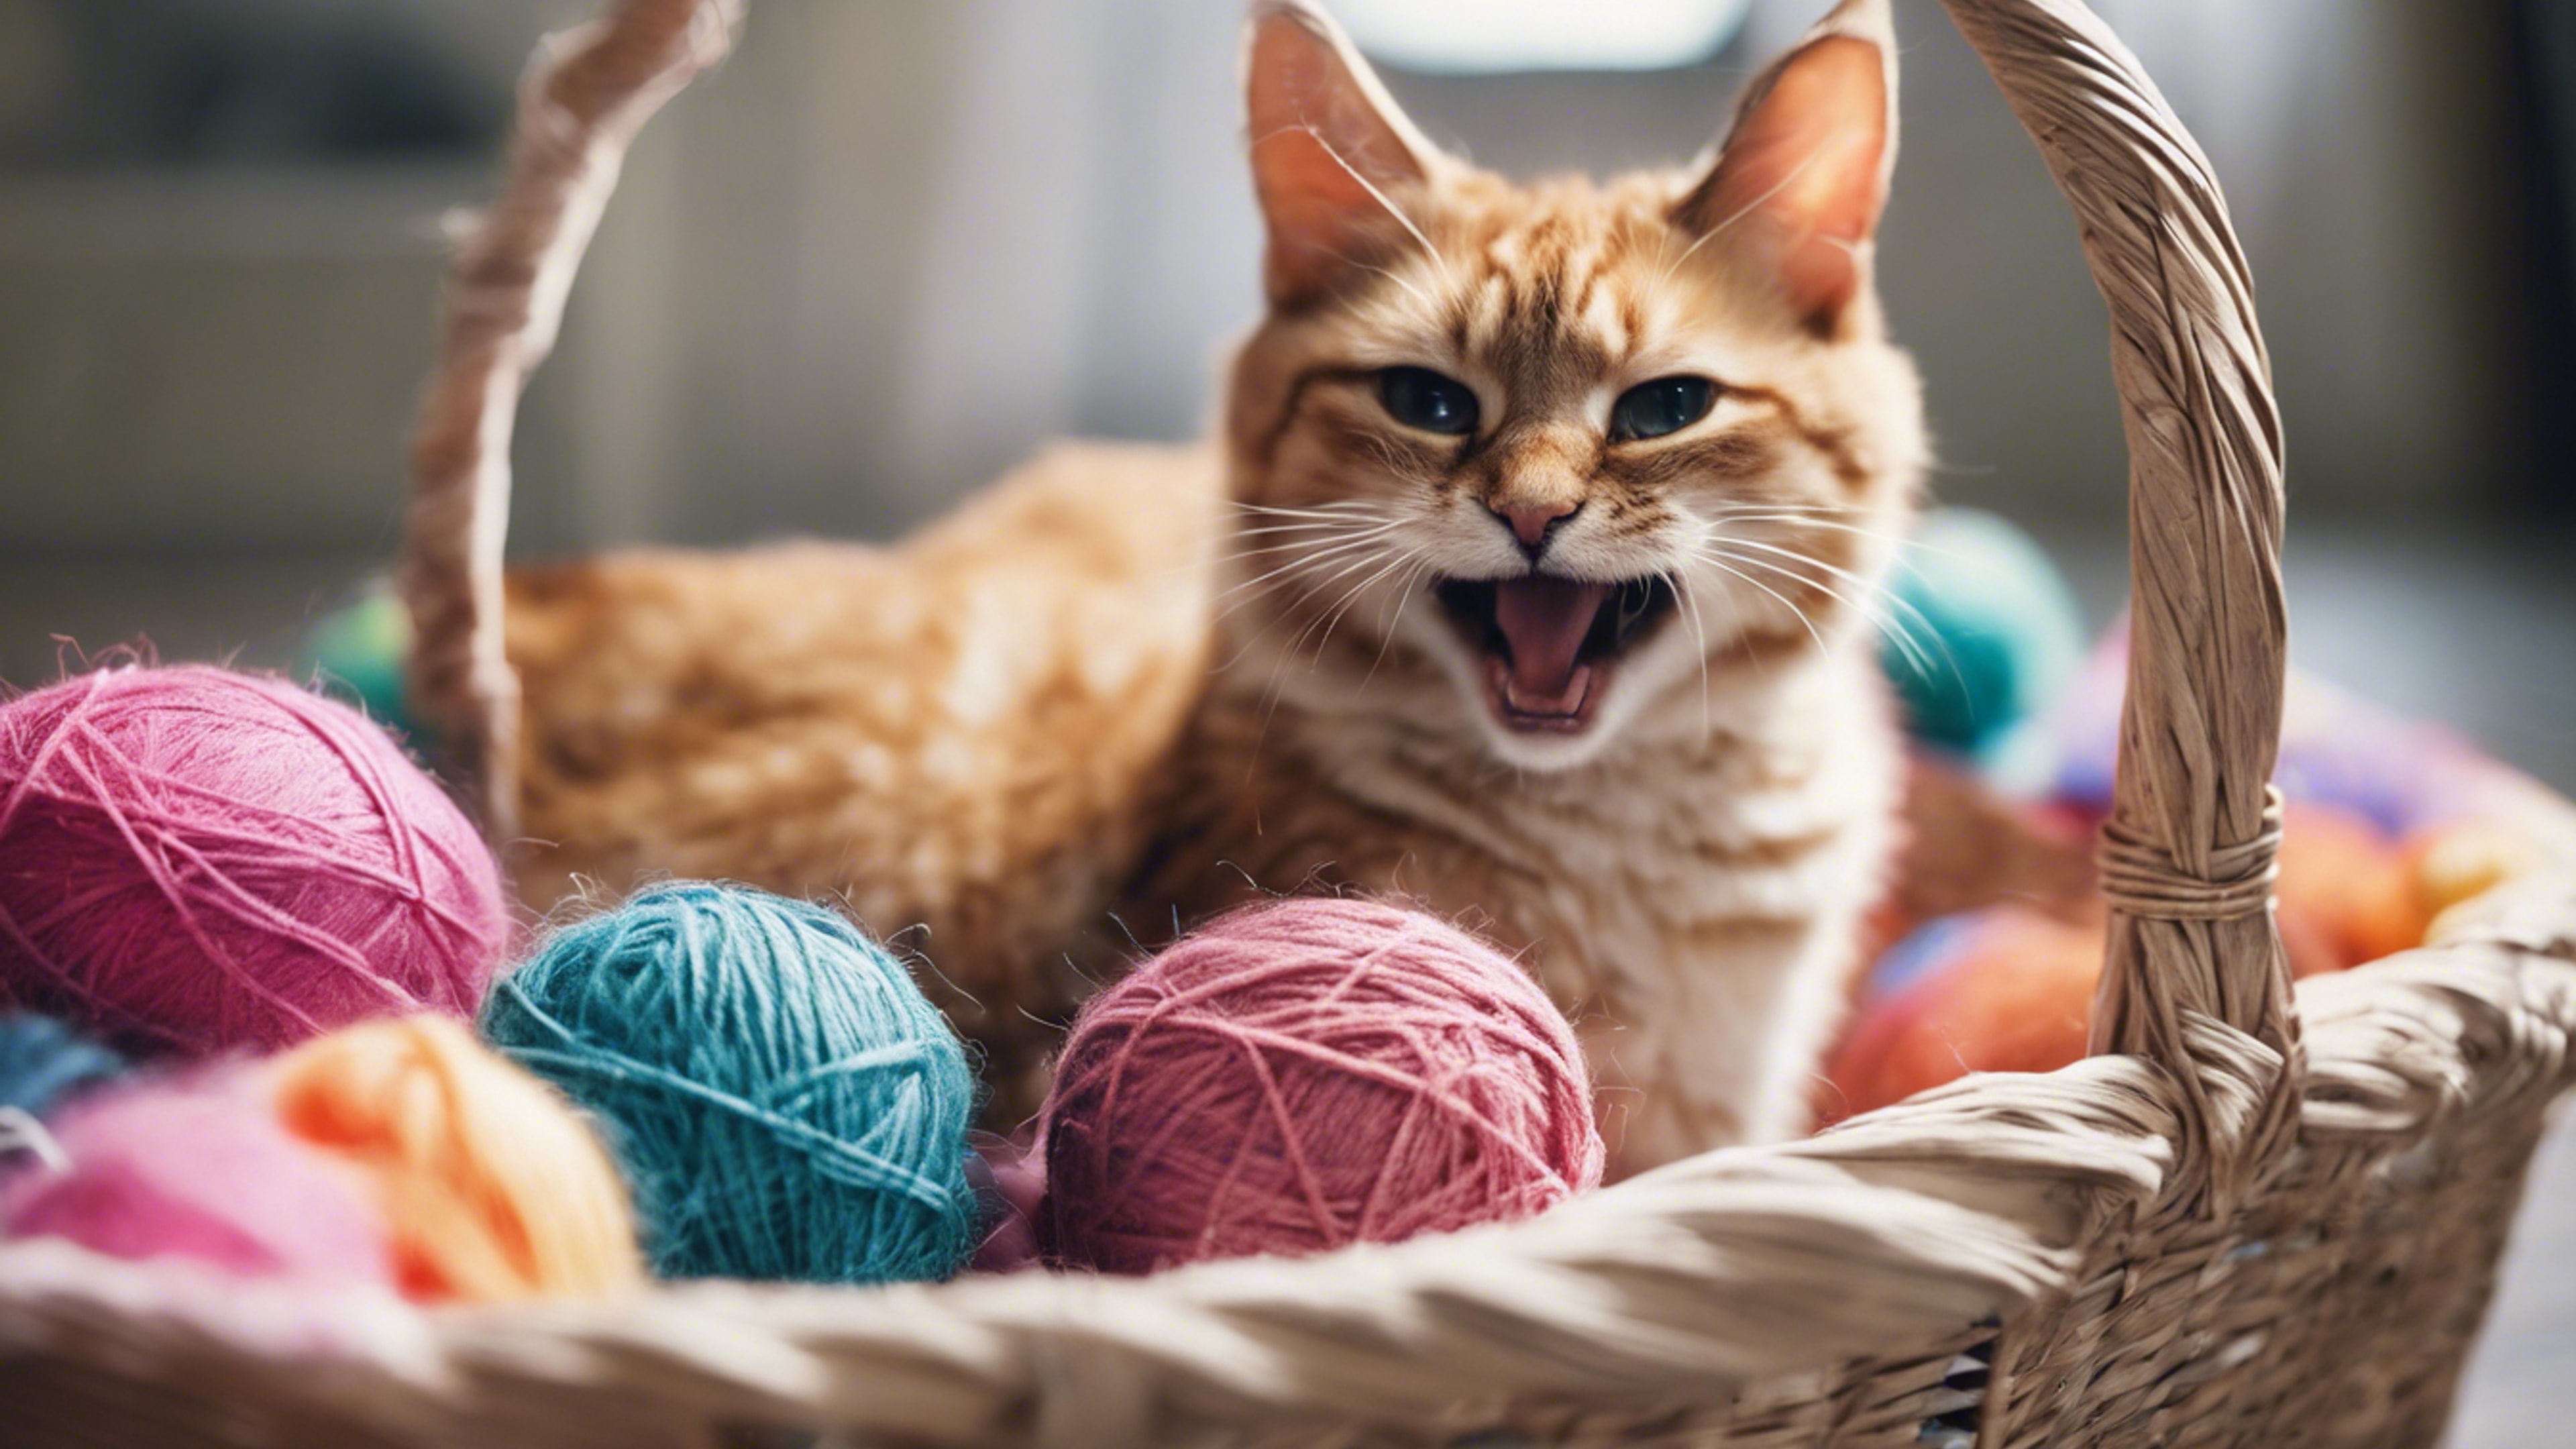 A cat mid-yawn in a basket filled with soft, colorful balls of yarn. Papel de parede[4de2b2f4a75d42f7bbf8]